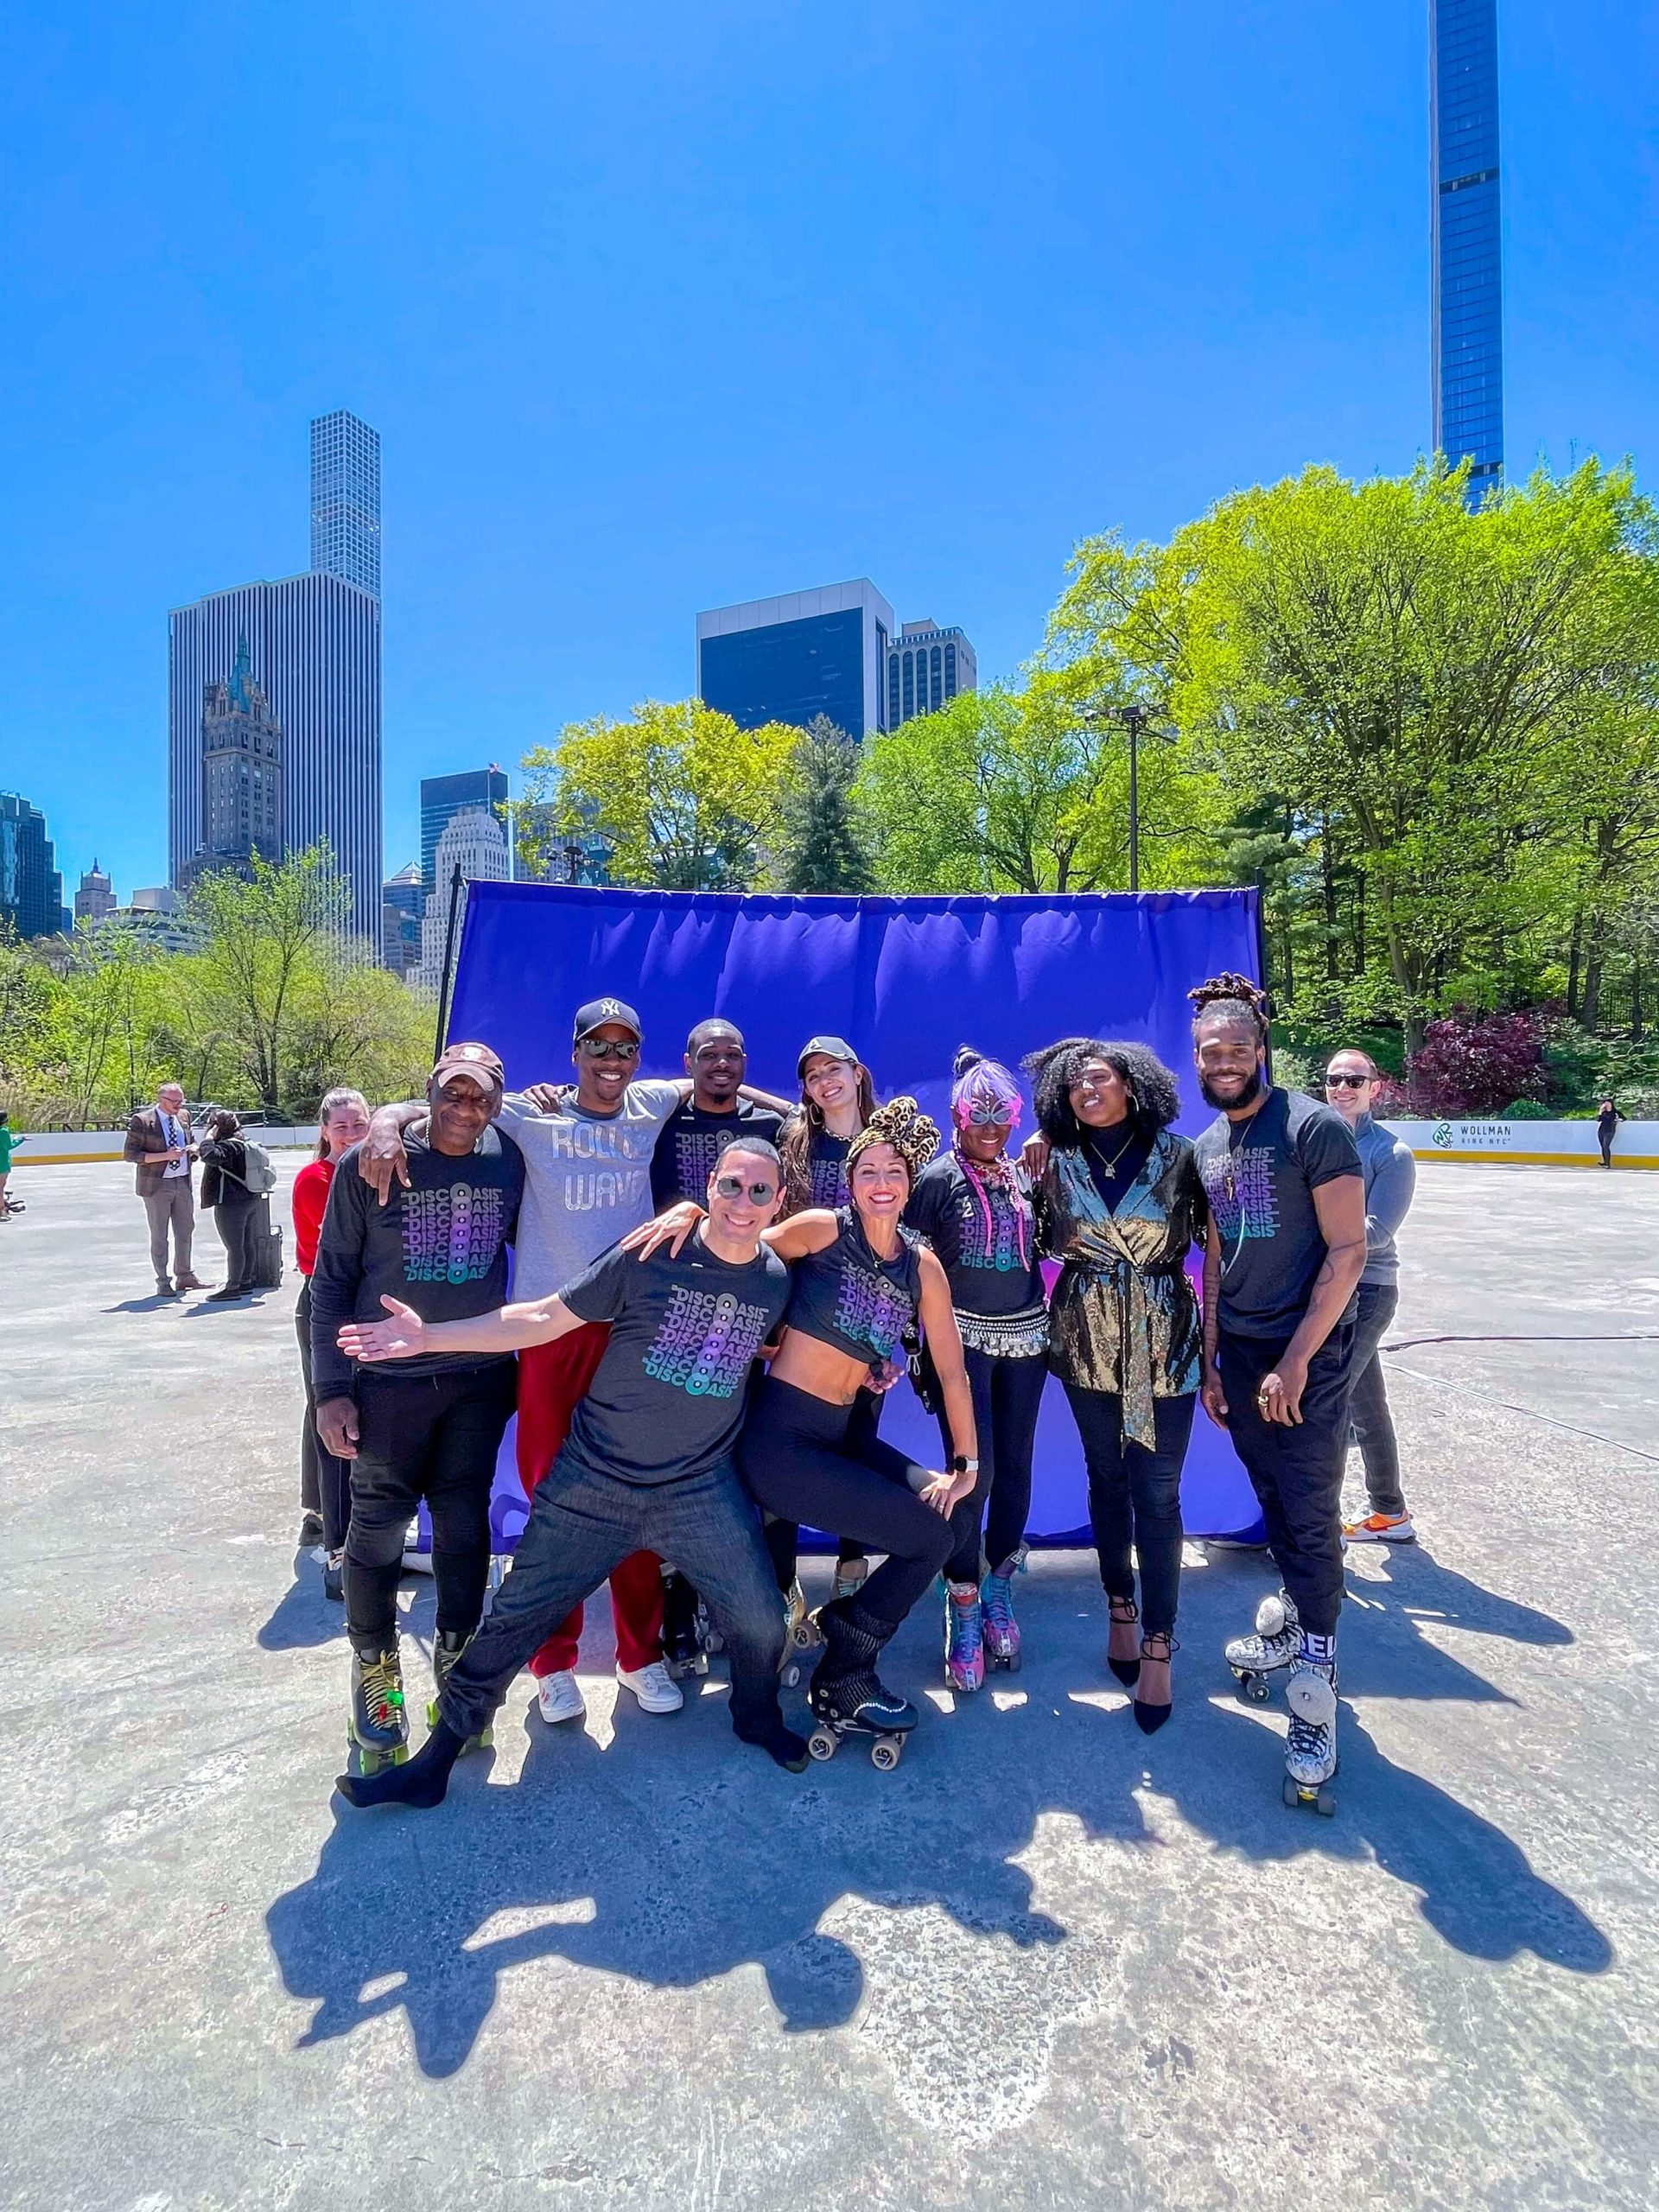 New York City Summer 2022 Events: “The DiscOasis” coming to Central Park